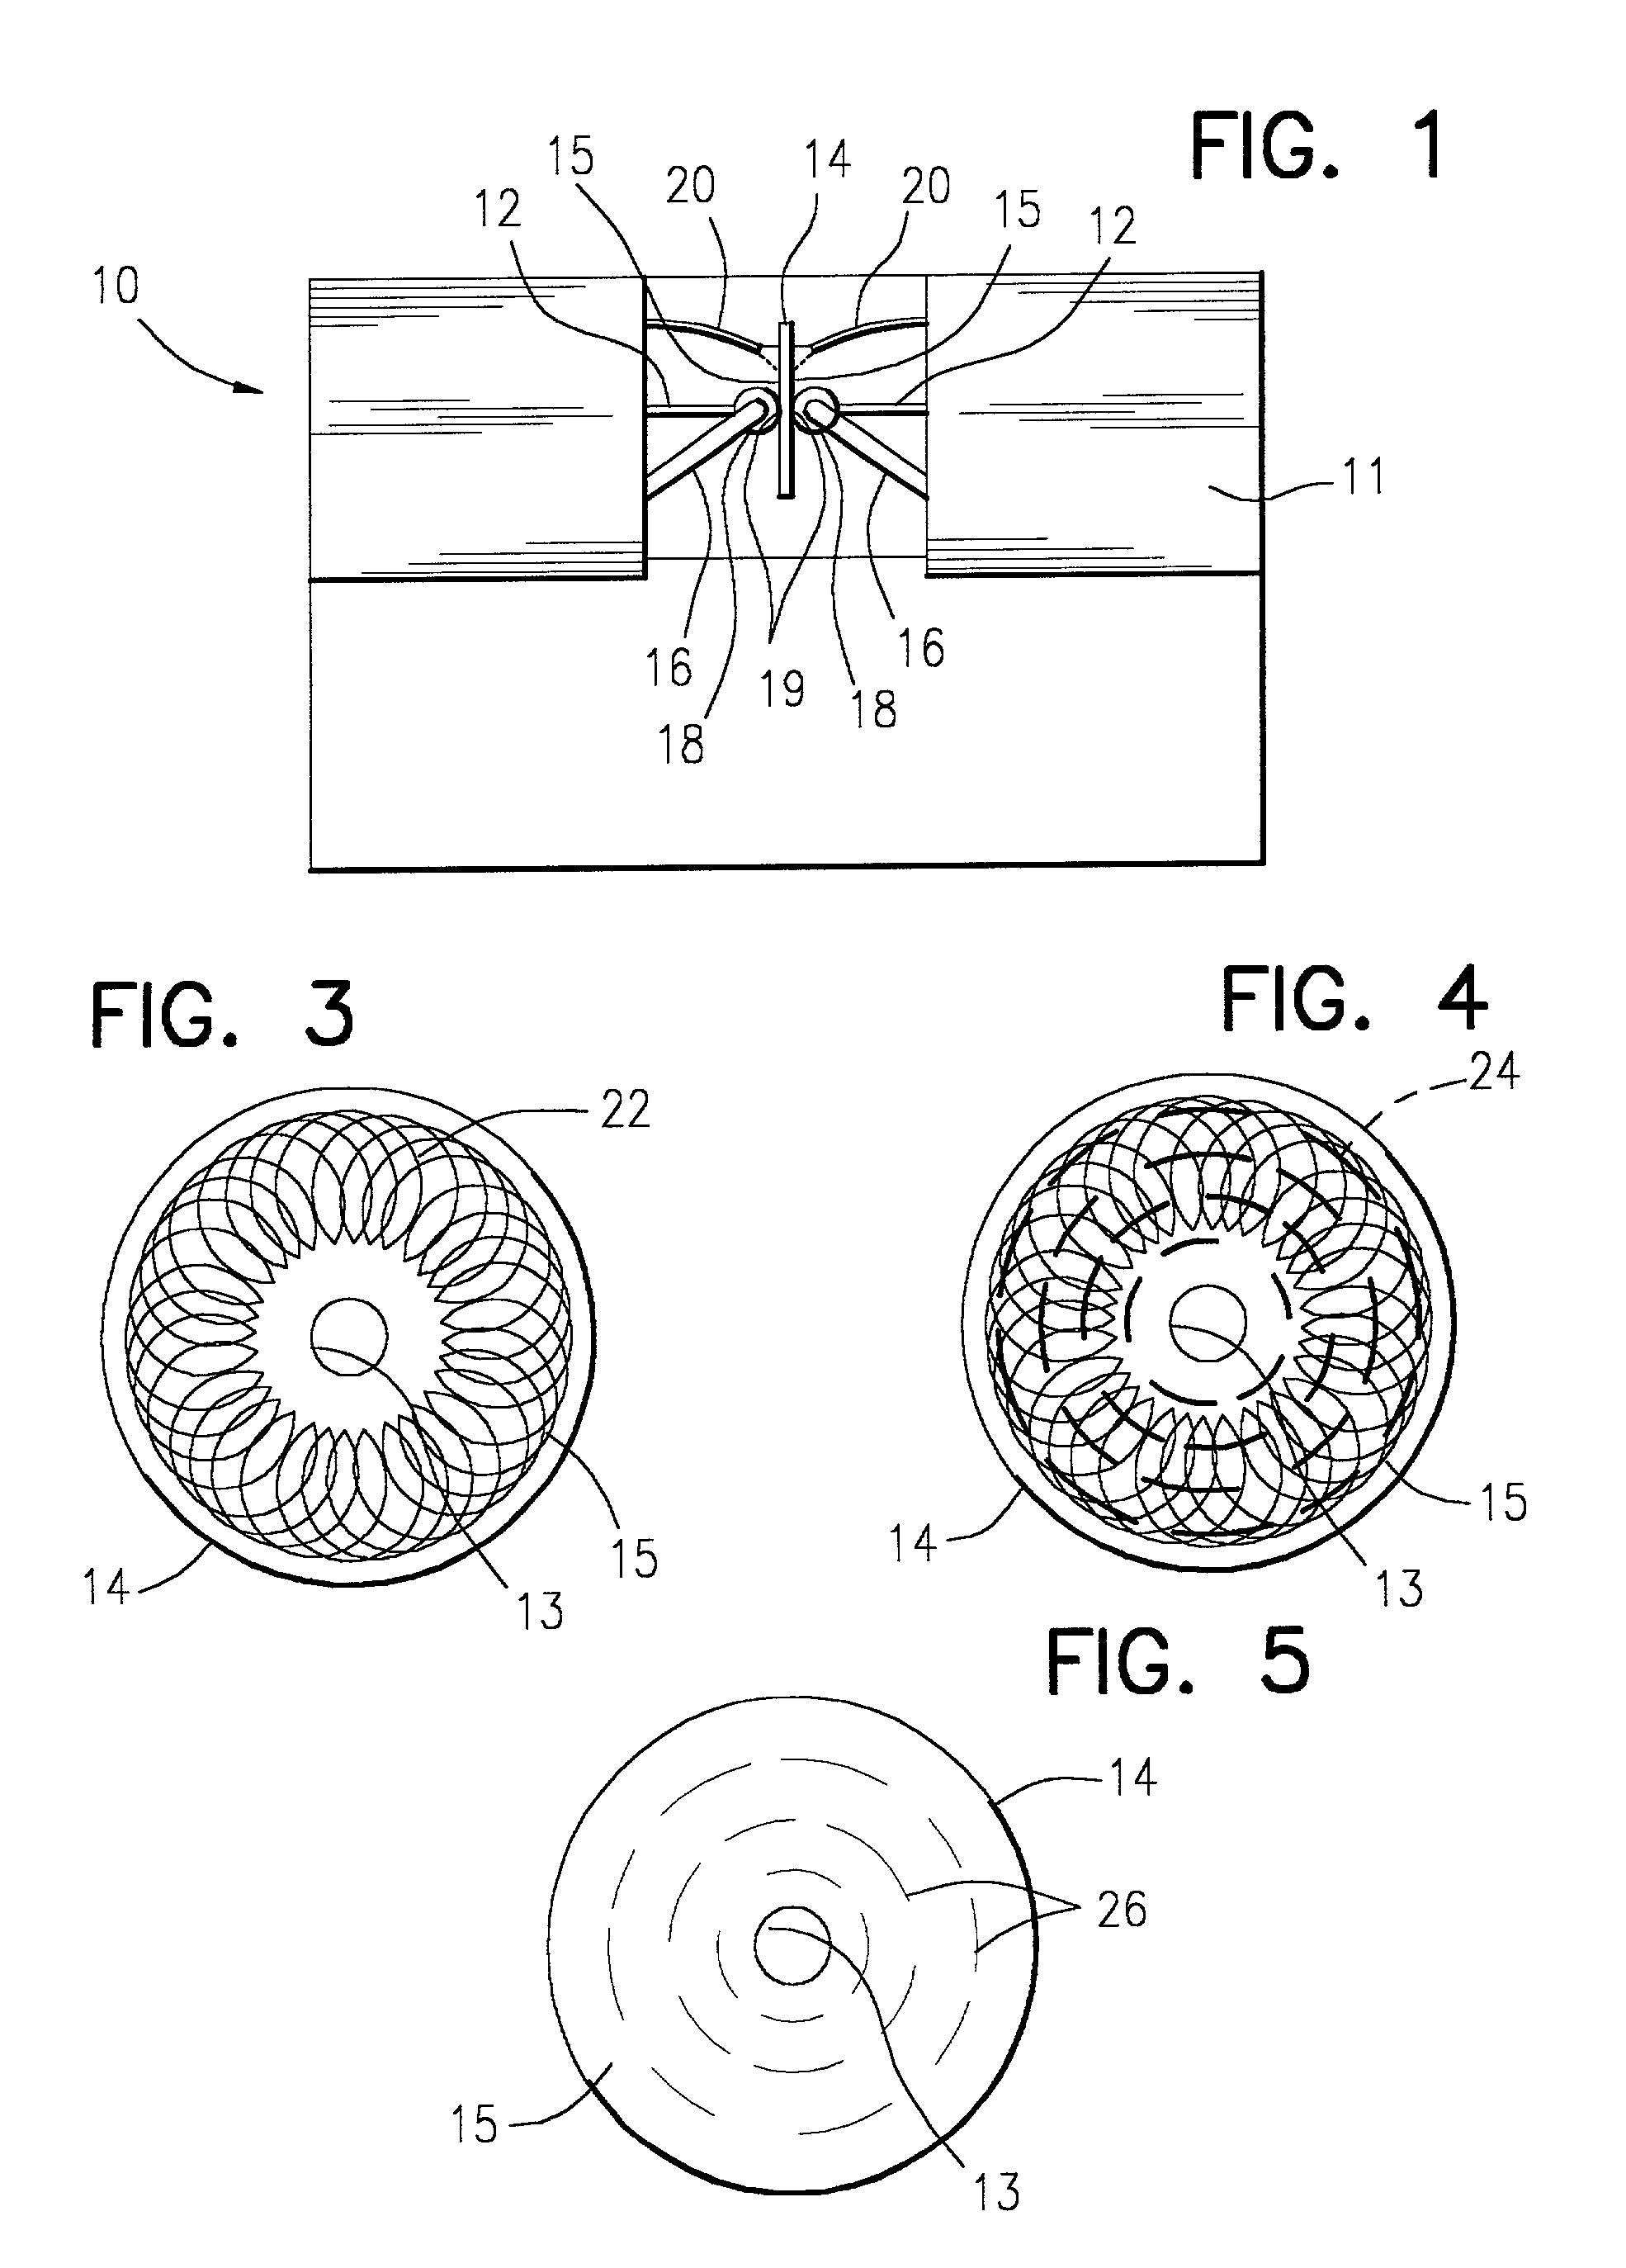 Process for producing glass disk substrates for magnetically recordable data storage disks